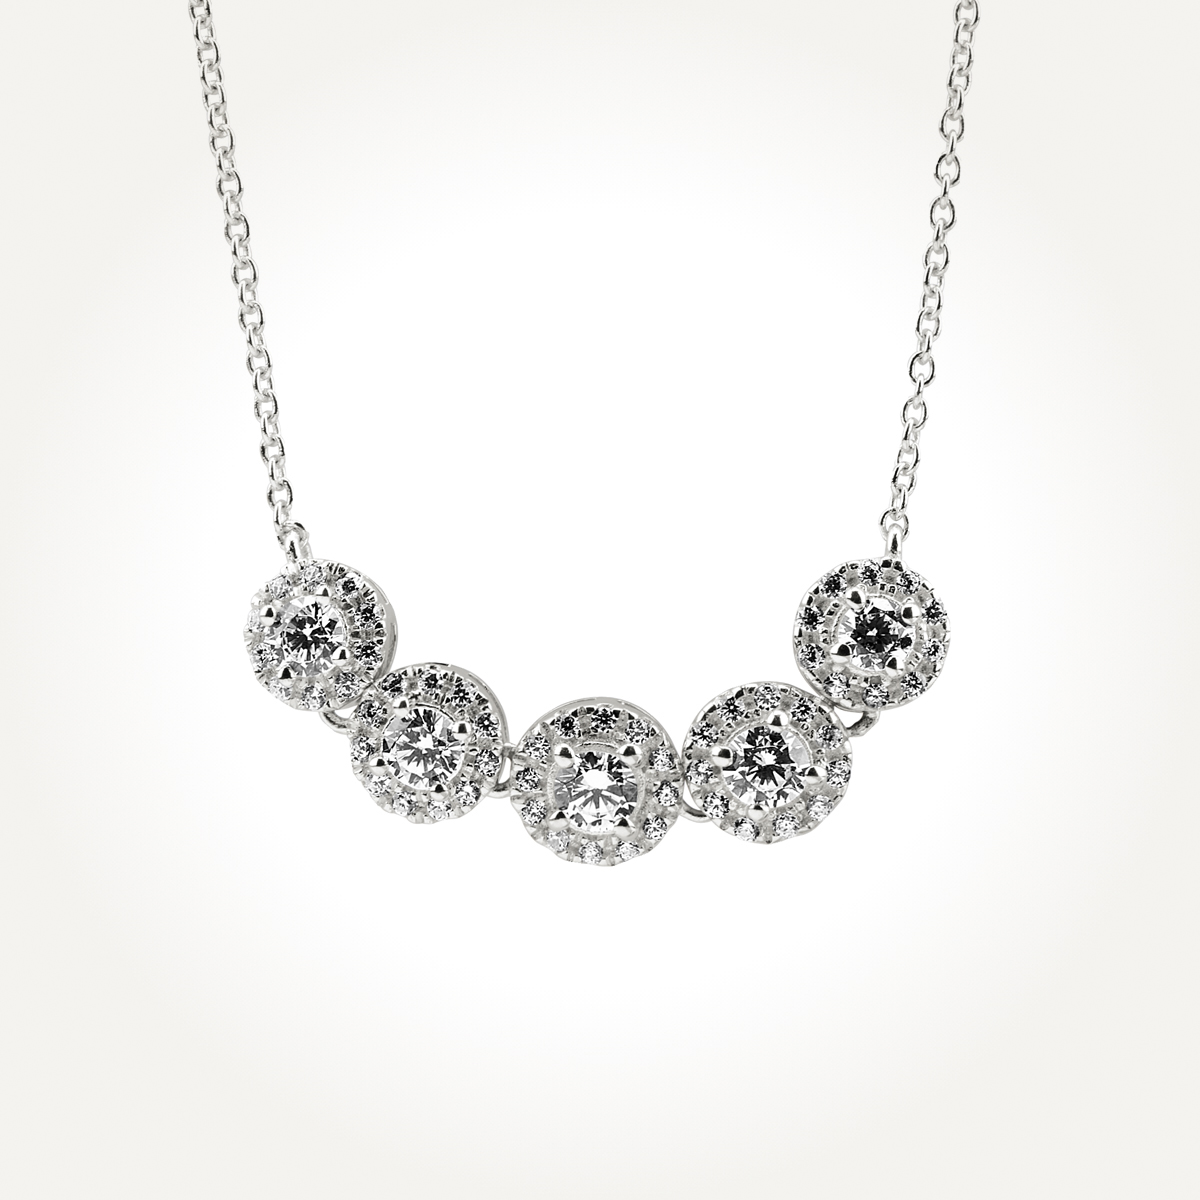 14KT White Gold Five Stone Halo Necklace